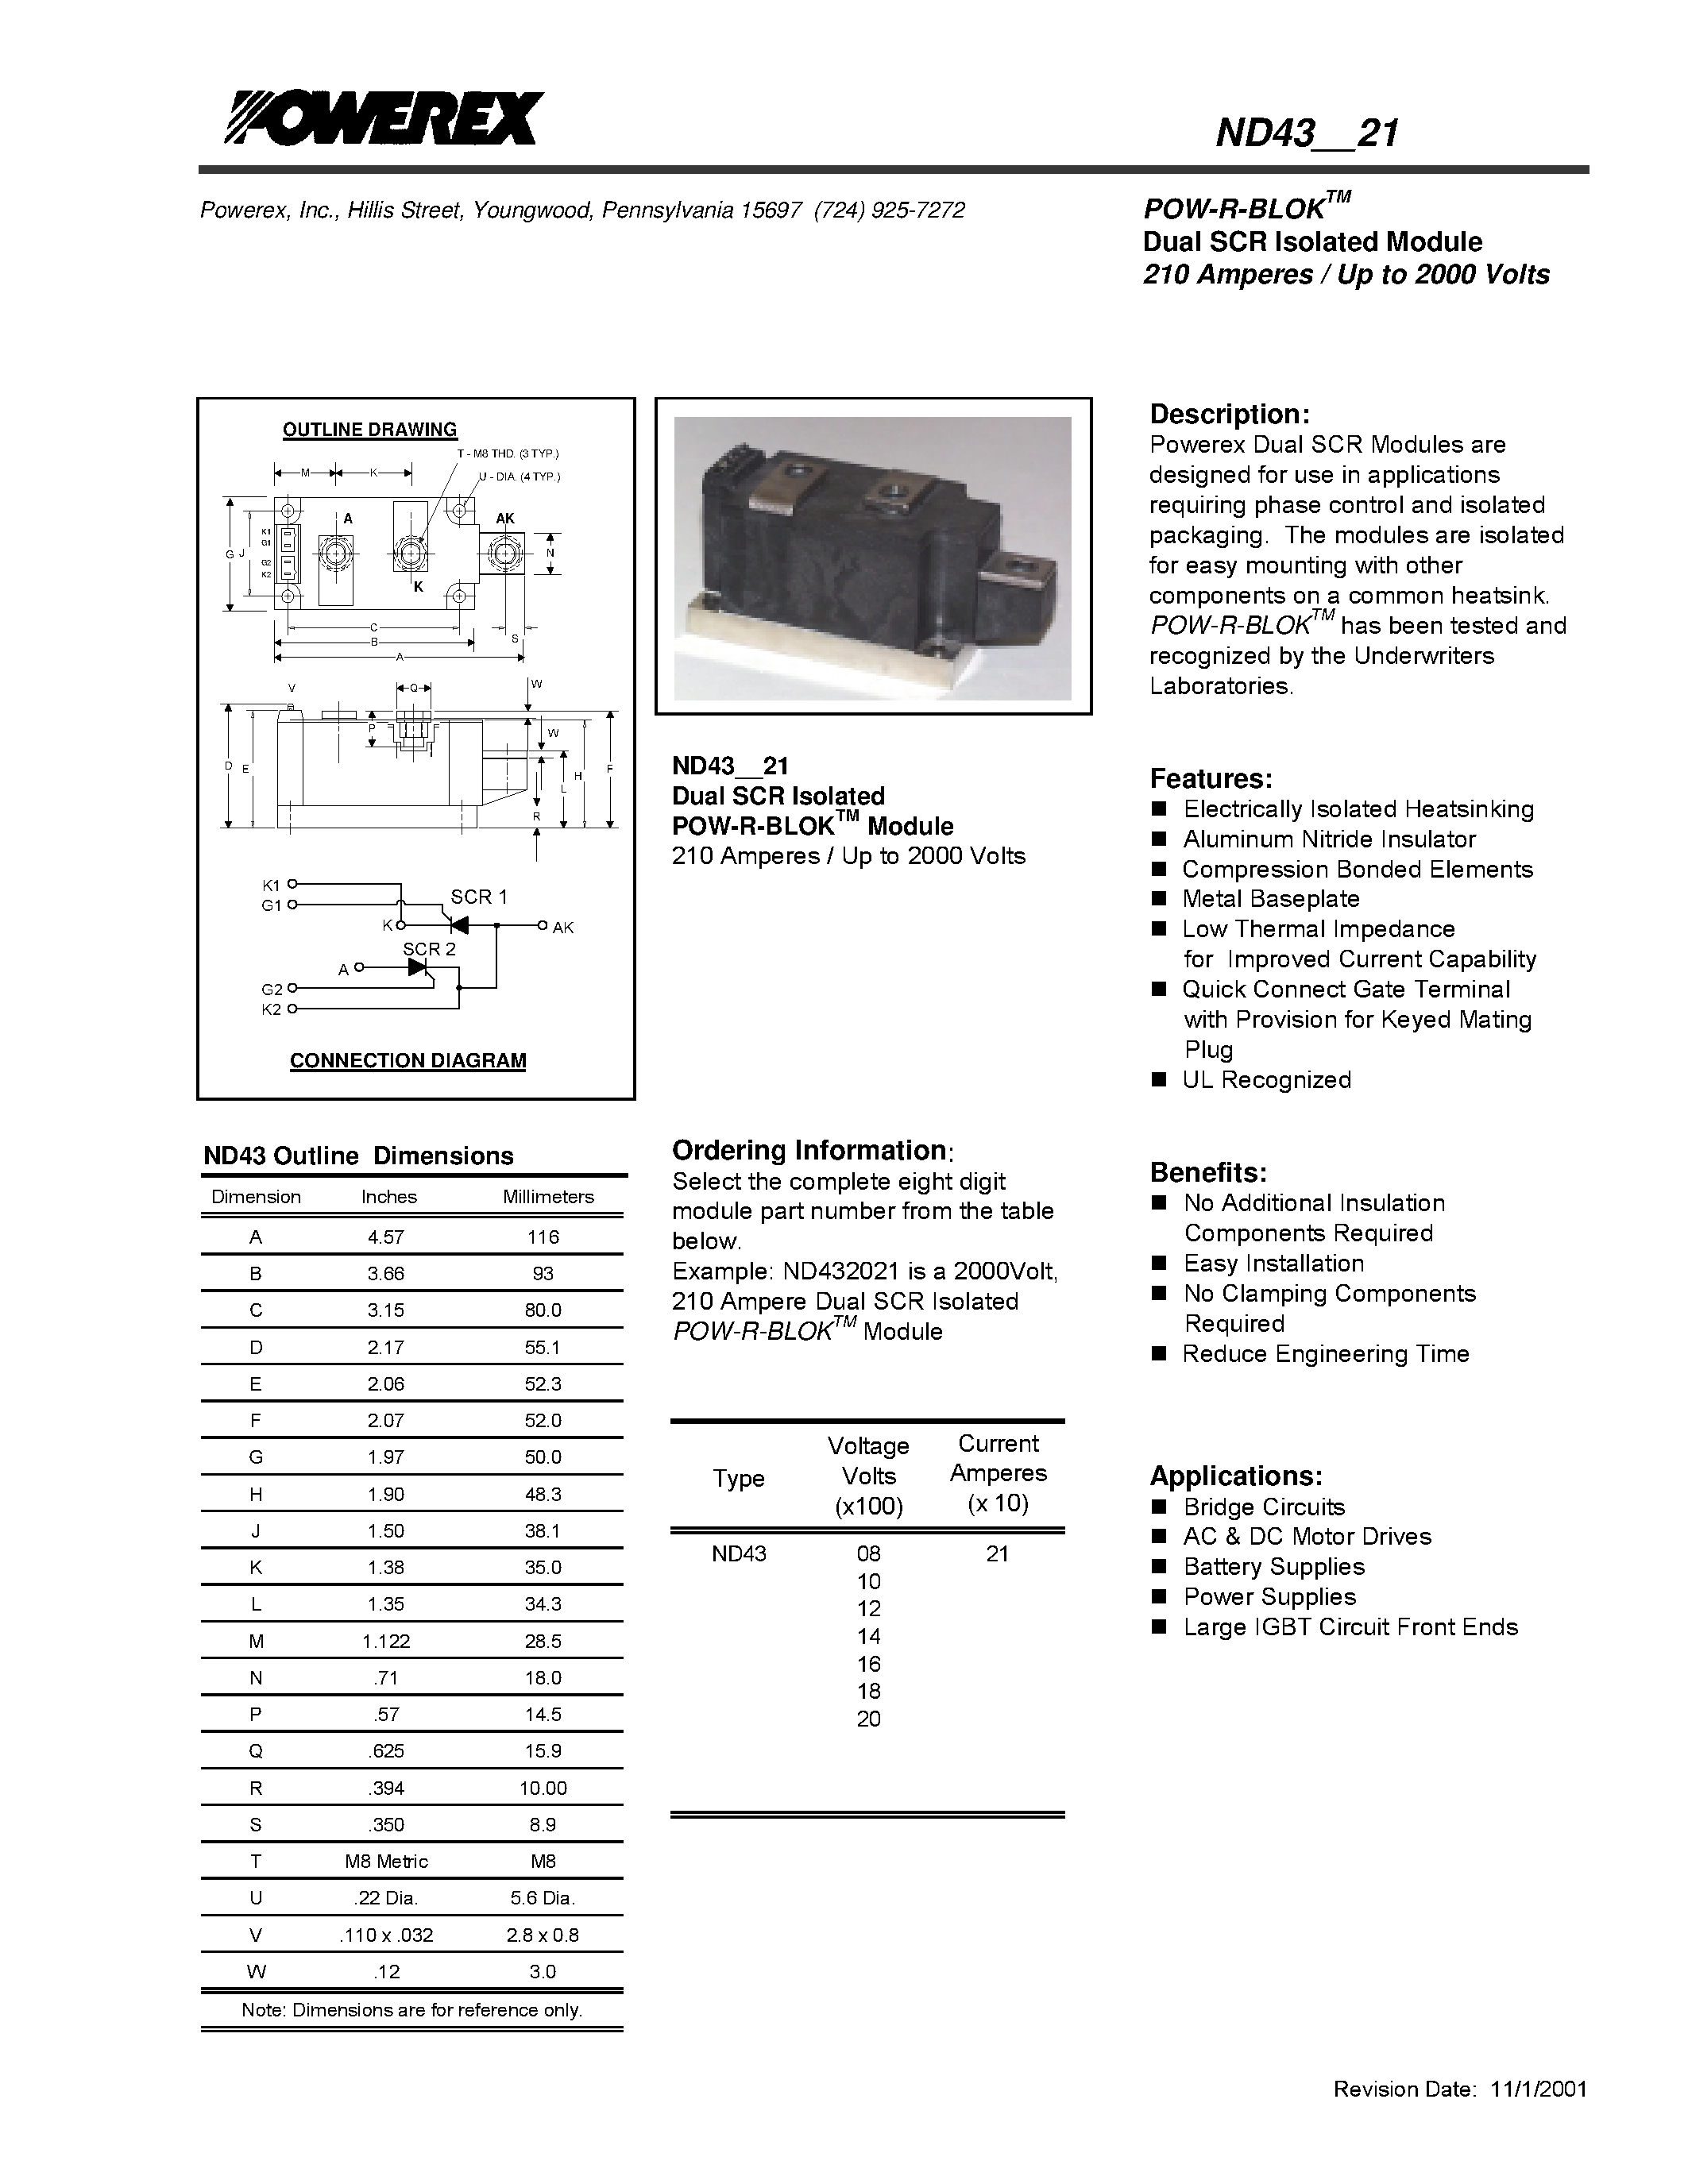 Datasheet ND432021 - POW-R-BLOK Dual SCR Isolated Module (210 Amperes / Up to 2000 Volts) page 1